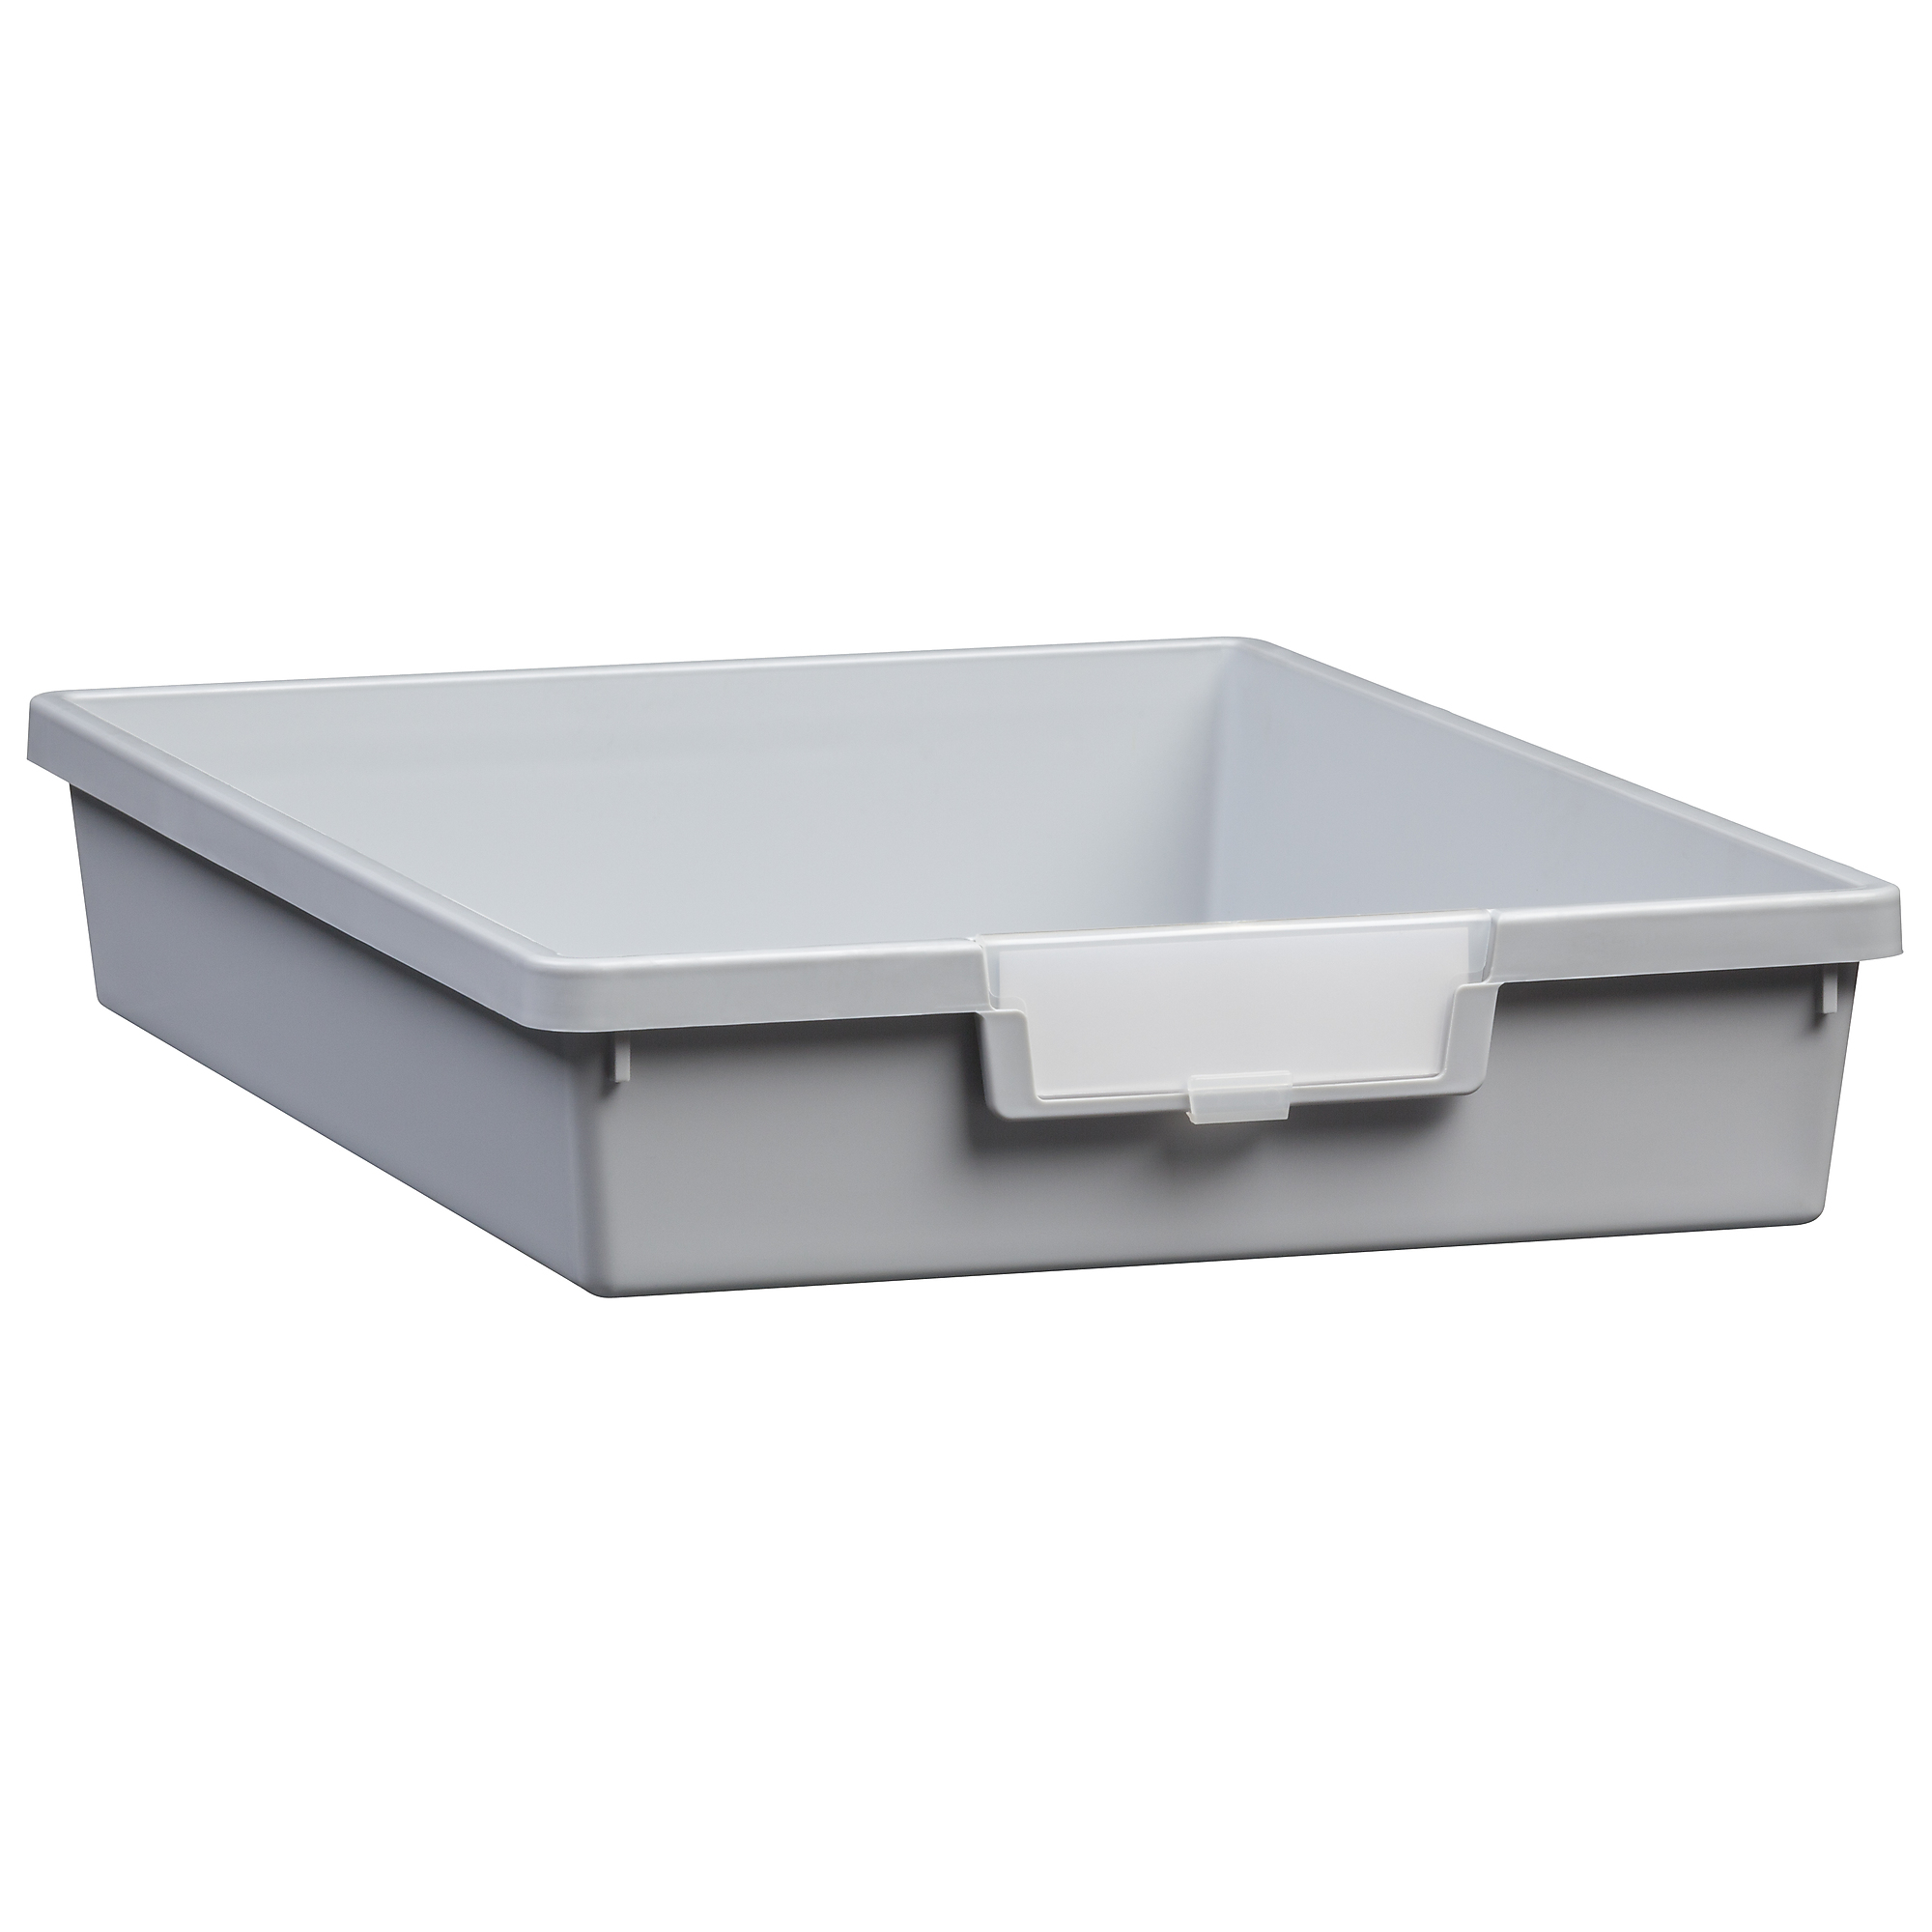 Certwood StorWerks, Slim Line 3Inch Tray in Light Gray-3PK, Included (qty.) 3 Height 3 in, Model CE1950LG3